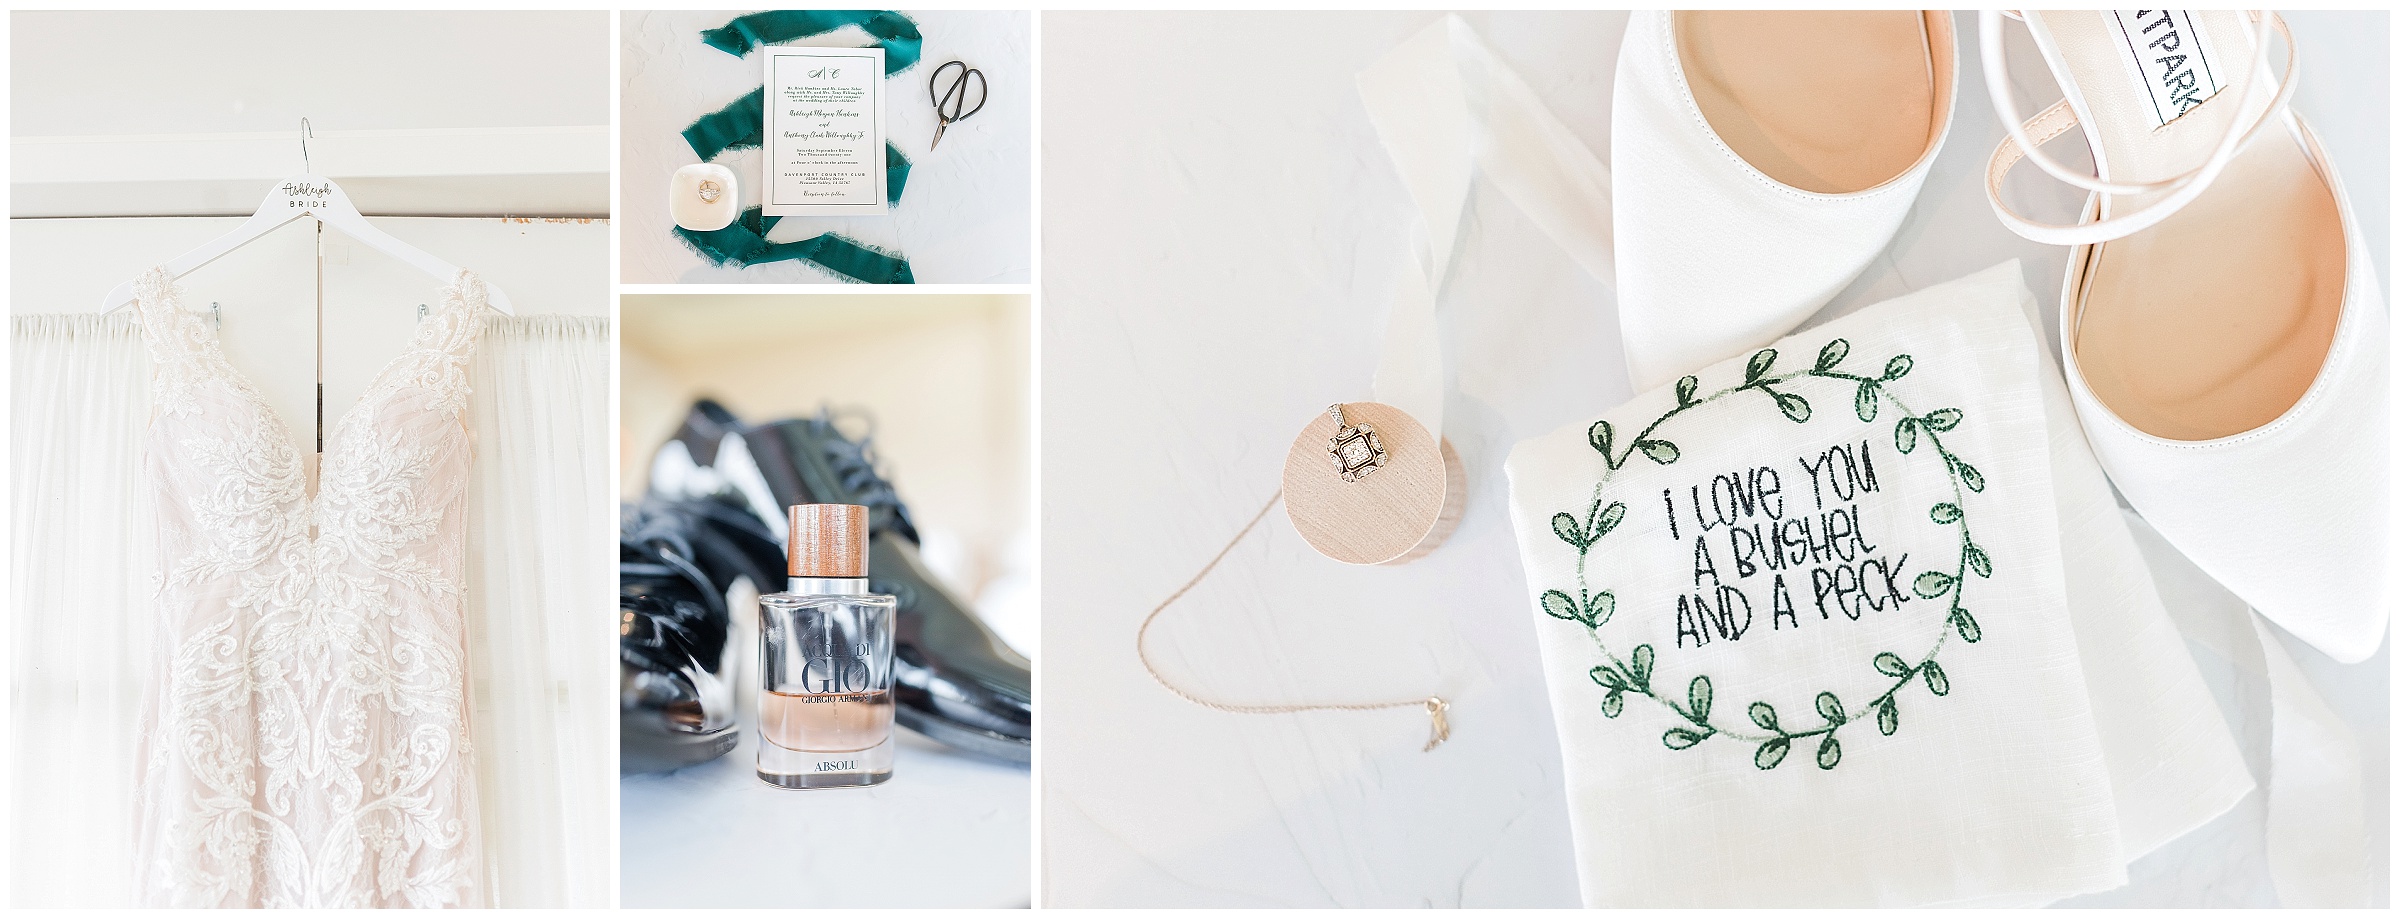 Wedding day details including dress, cologne, invitation, shoes, necklace, and handkerchief